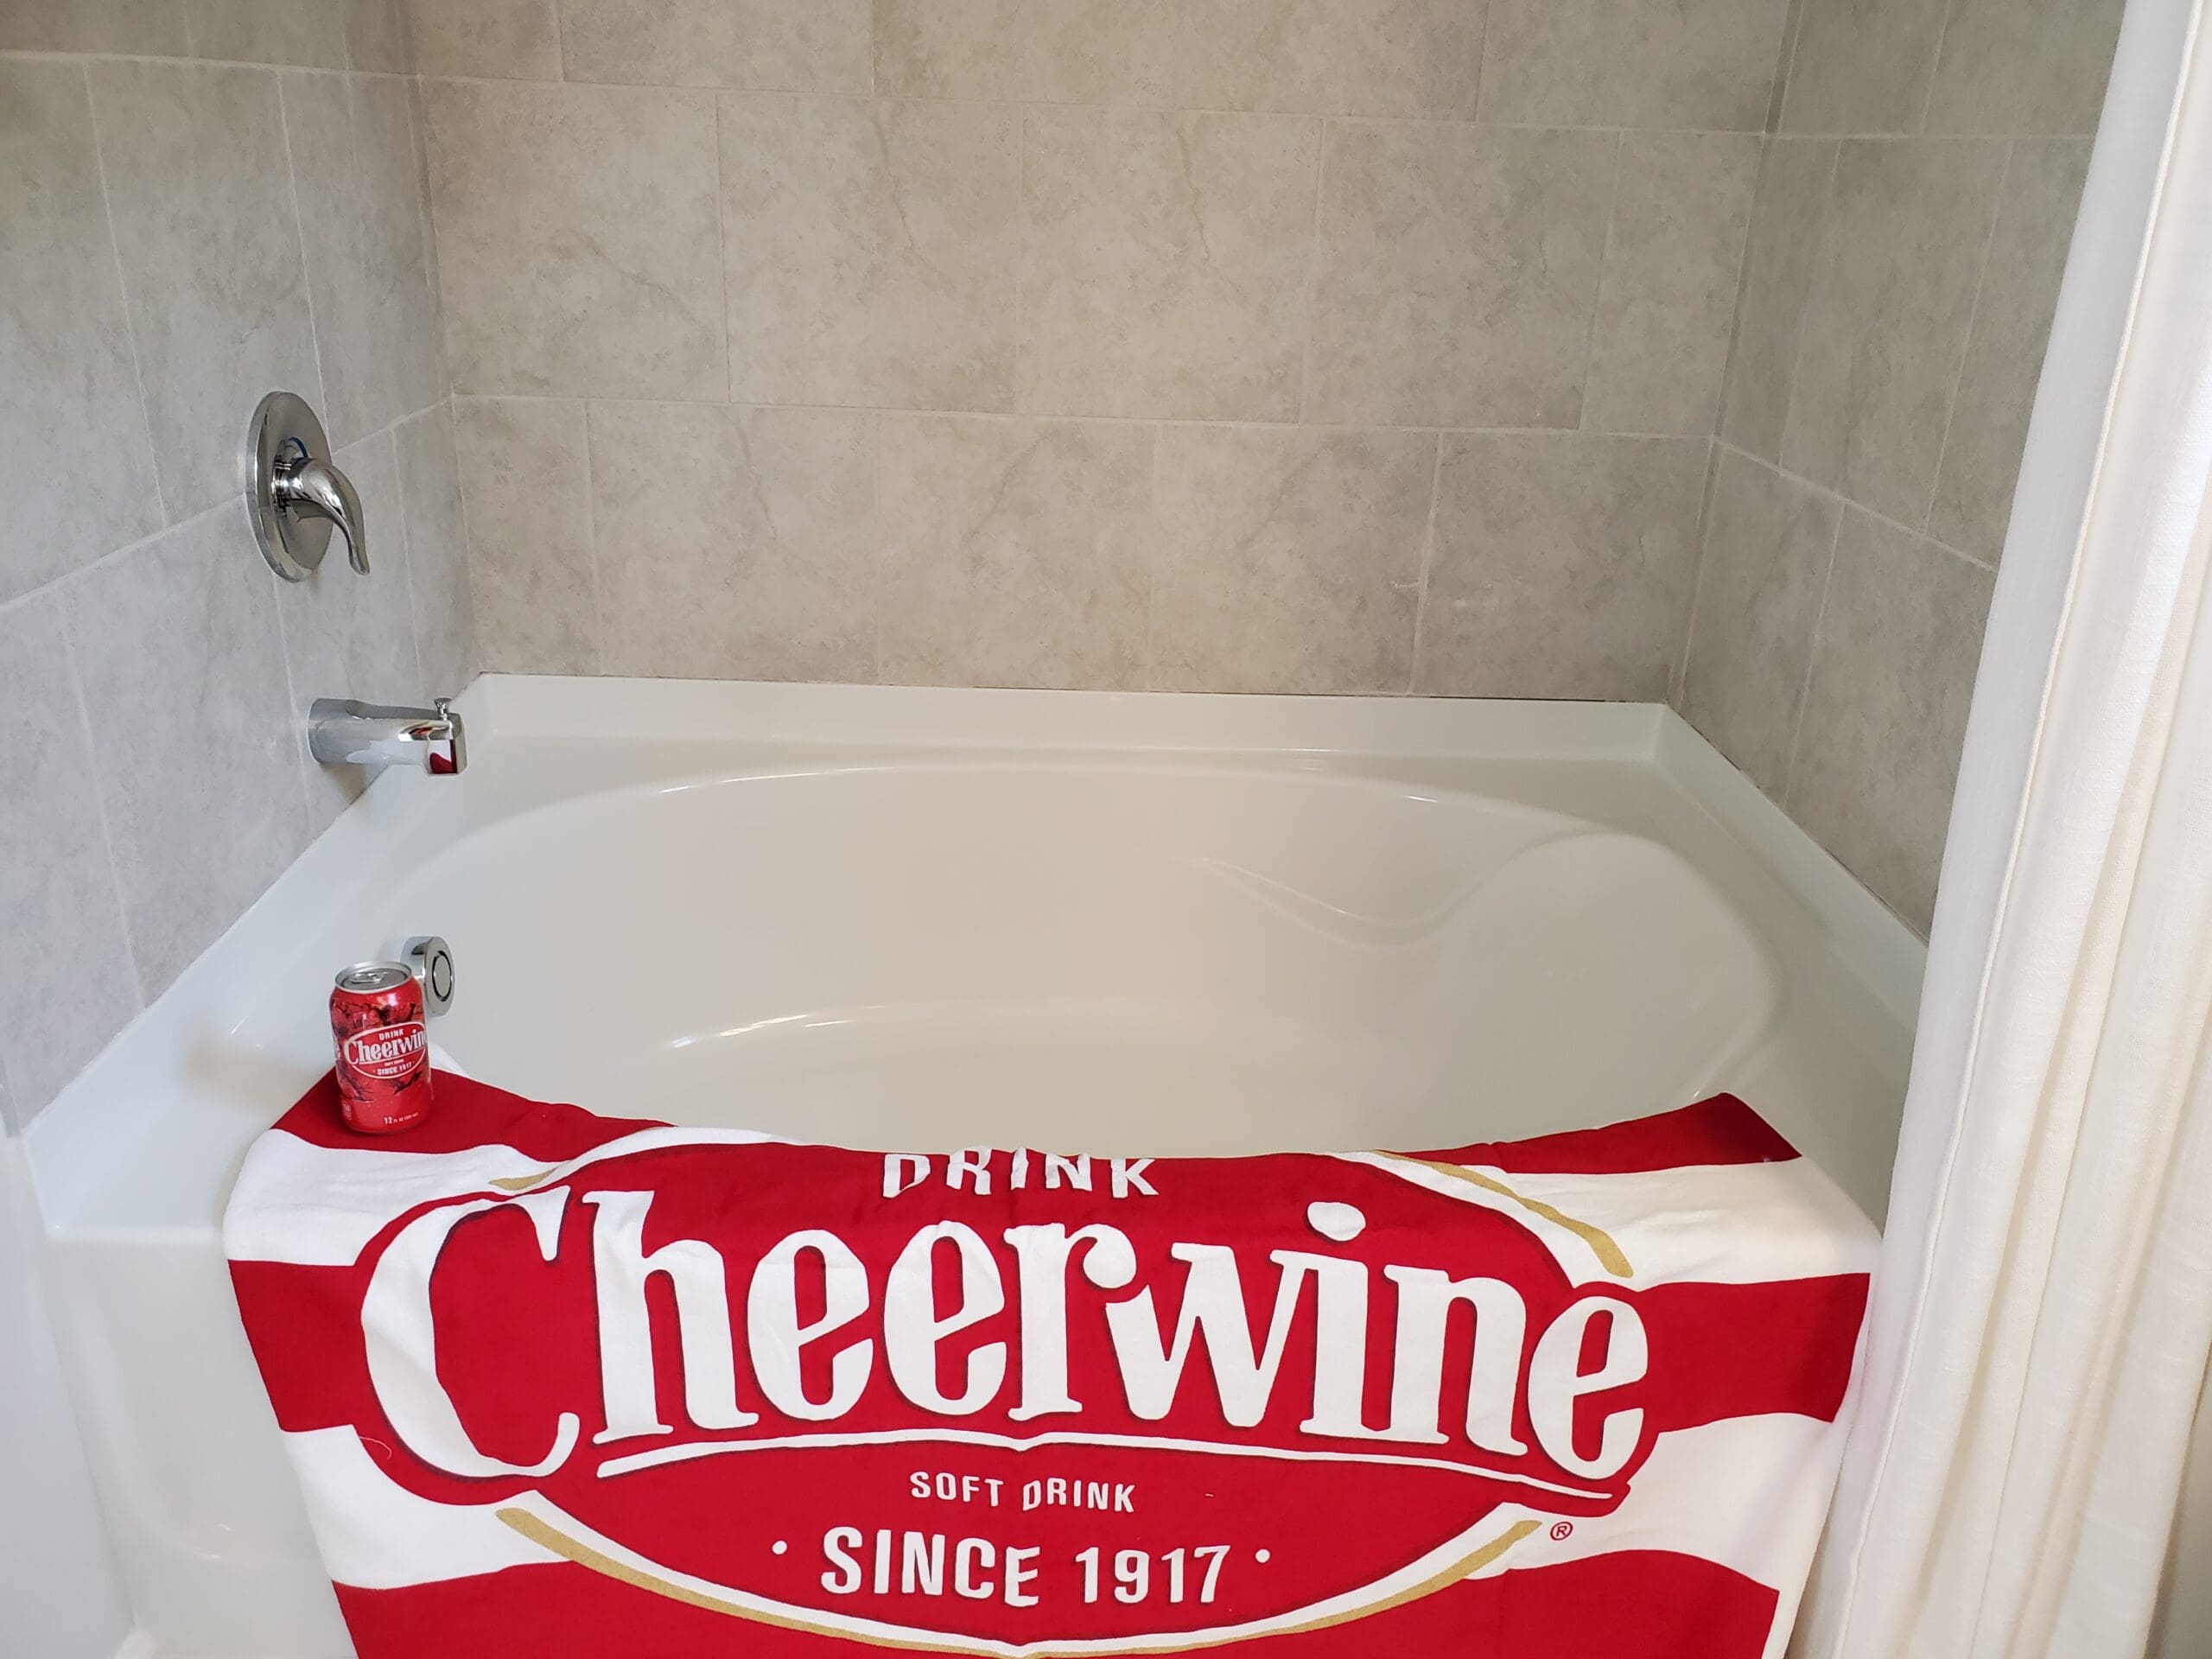 Cheerwine in the tub. Sip and soak. 